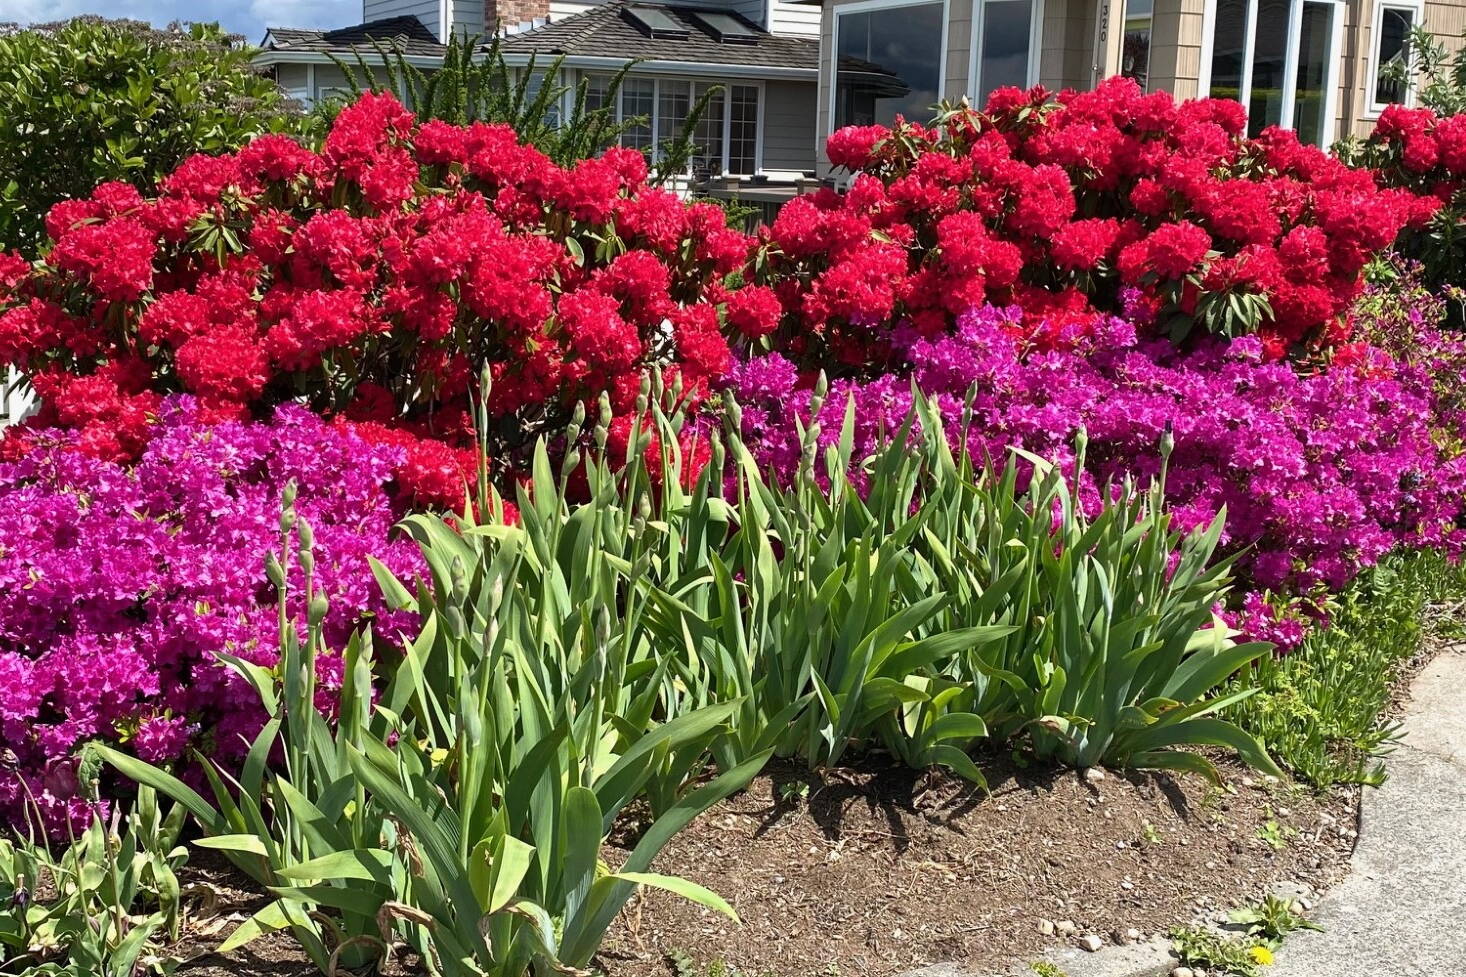 A local display of flowering rhododendrons may include some types with toxic nectar. (Photo by Denise Carroll)